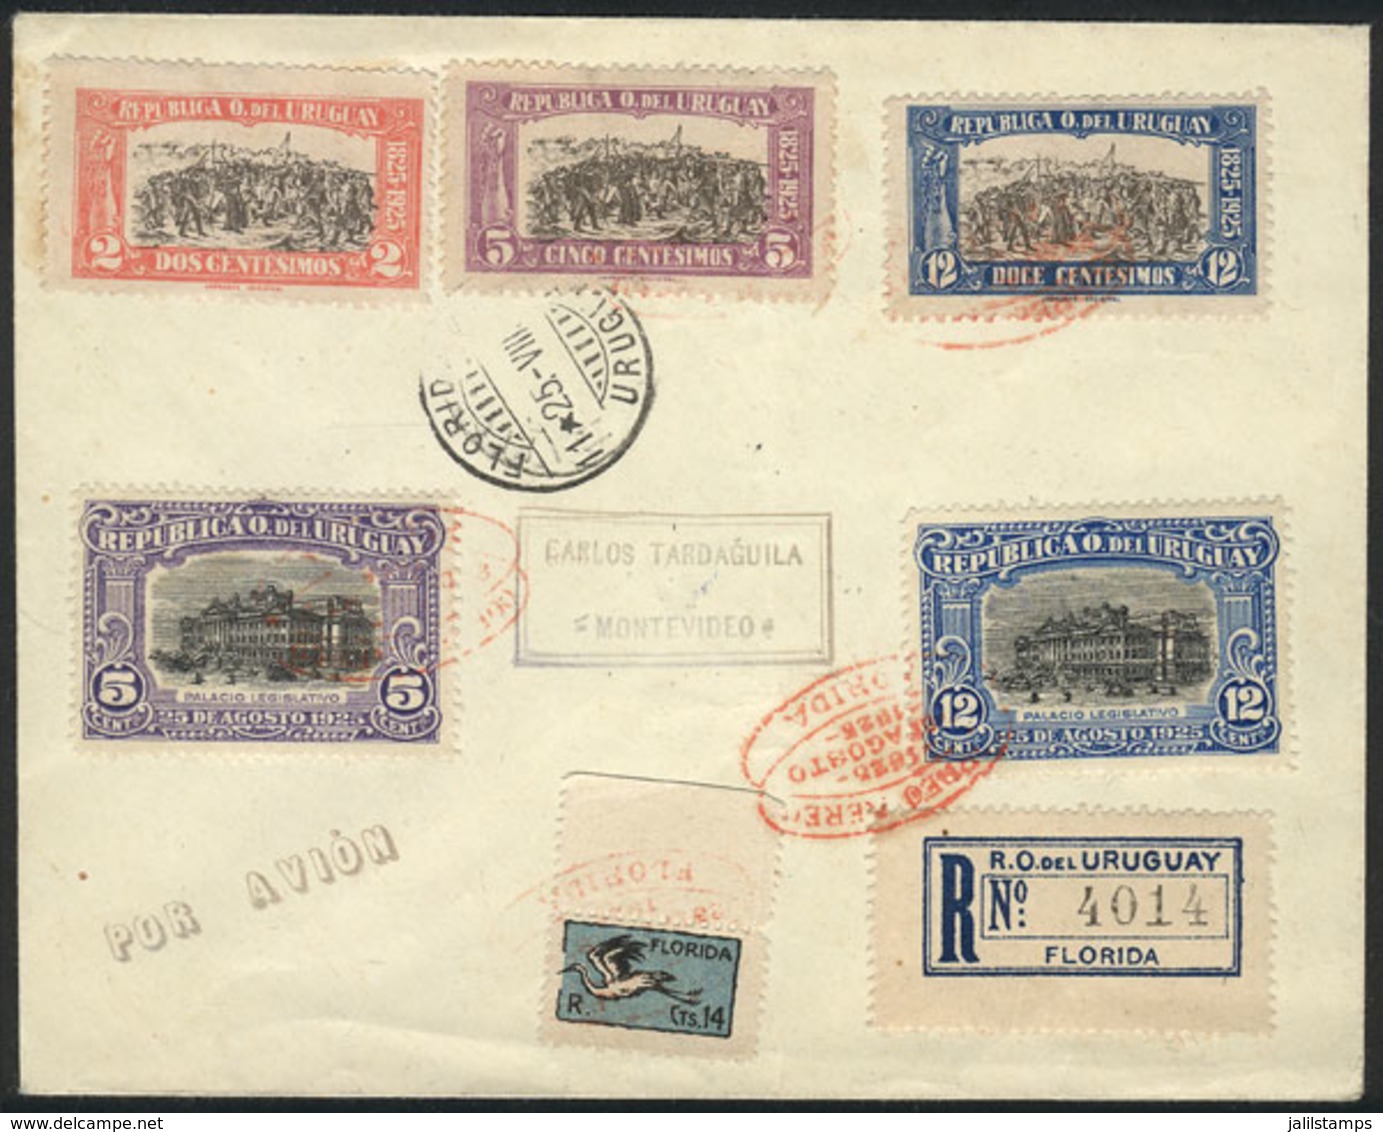 URUGUAY: 25/AU/1925 First Flight Florida - Montevideo, Registered Cover With Nice Postage, Very Fine Quality! - Uruguay